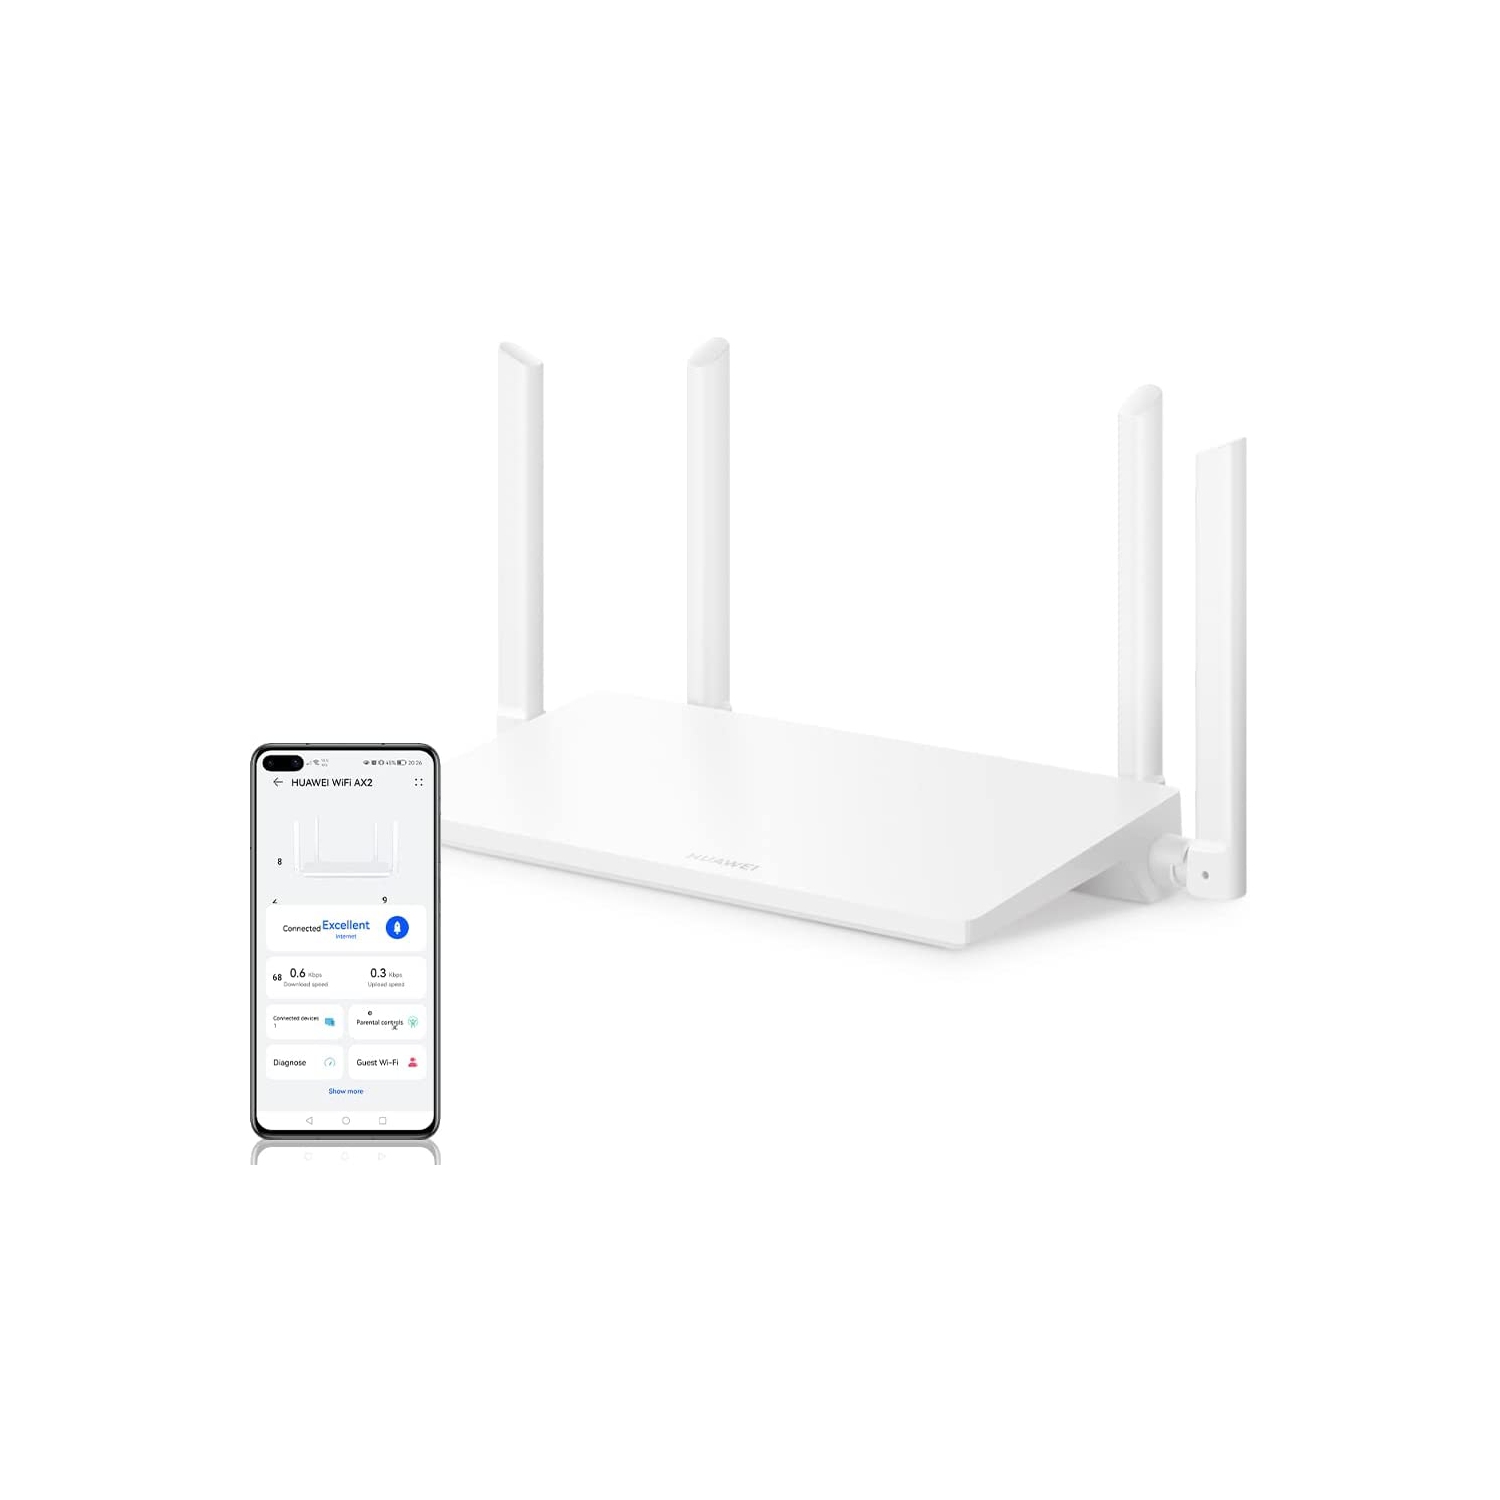 HUAWEI AX2 Smart Home WiFi 6 Wireless Router - 5 GHz Support up to 1500 Mbps, Comprehensive Parental Control, 3 WAN/LAN Auto-Adaptation Access Points, Manage with Android/ iOS app